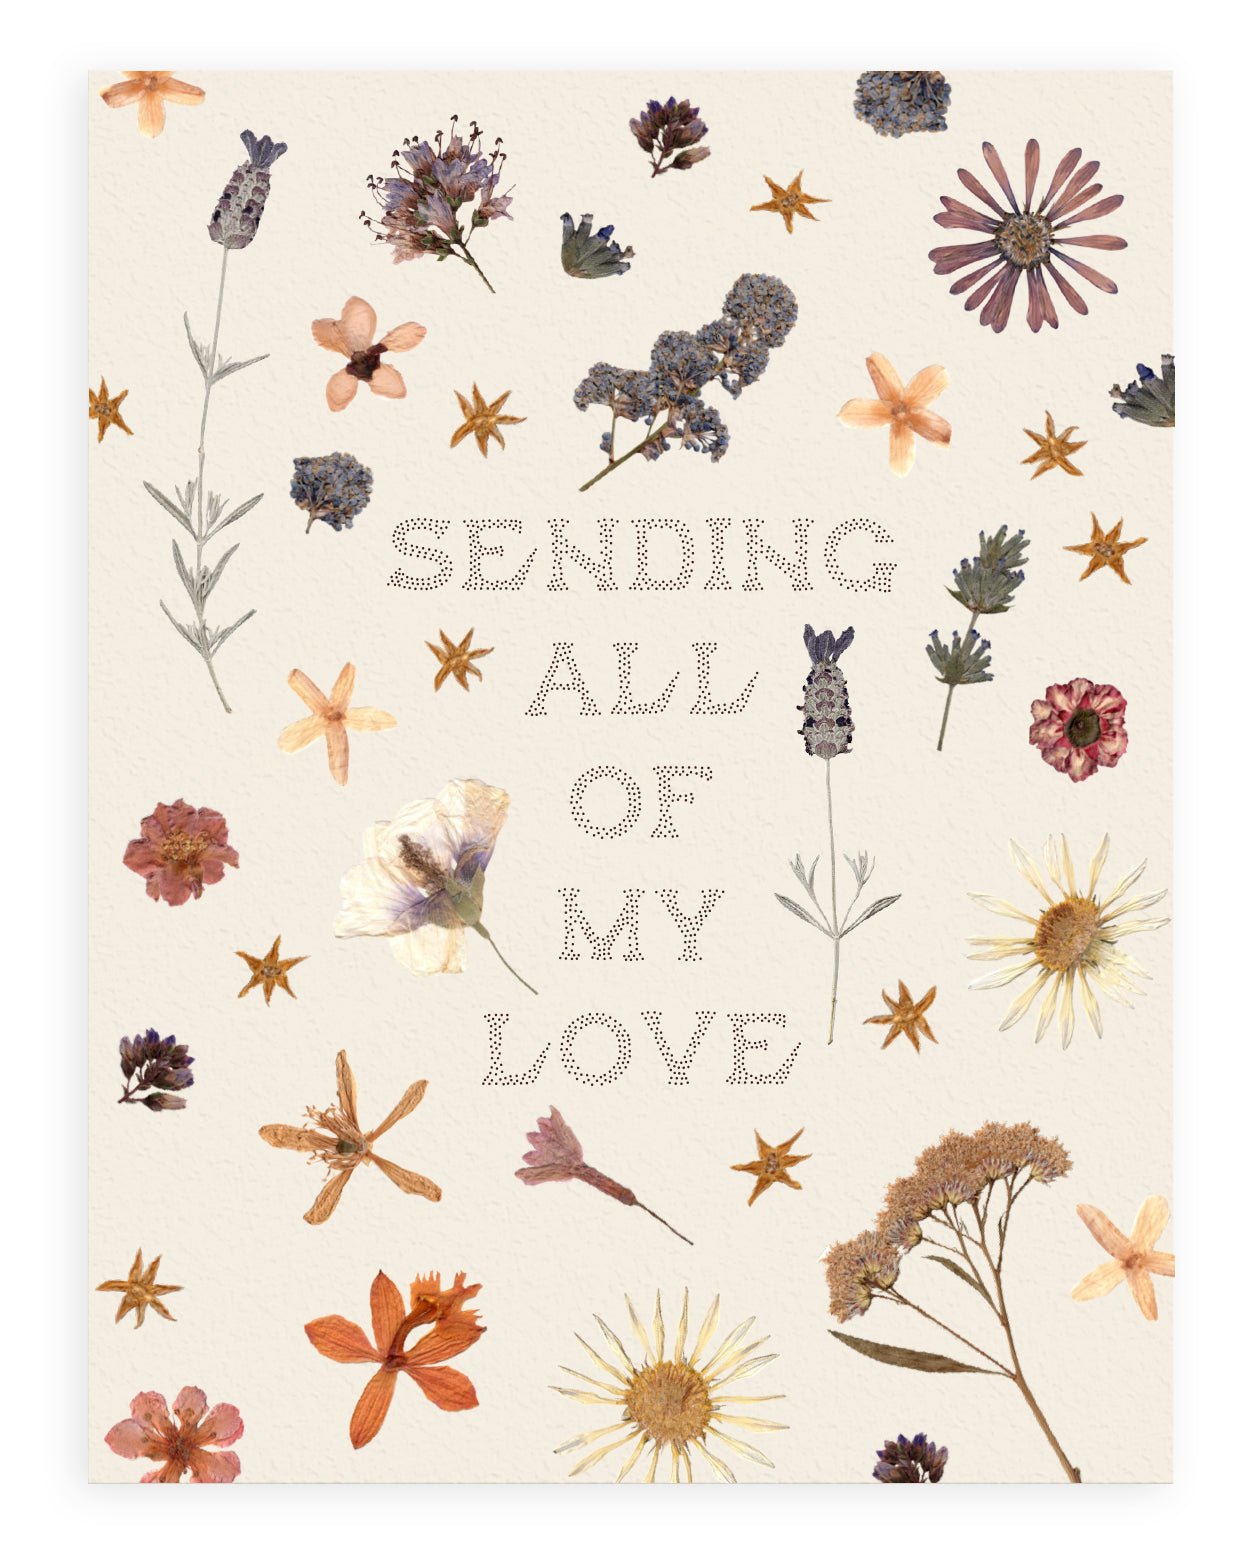 &quot;Sending All Of My Love&quot; pointillism text font design aligned in the center of the cream colored card surrounded by pressed flowers printed on cardstock against a white background.